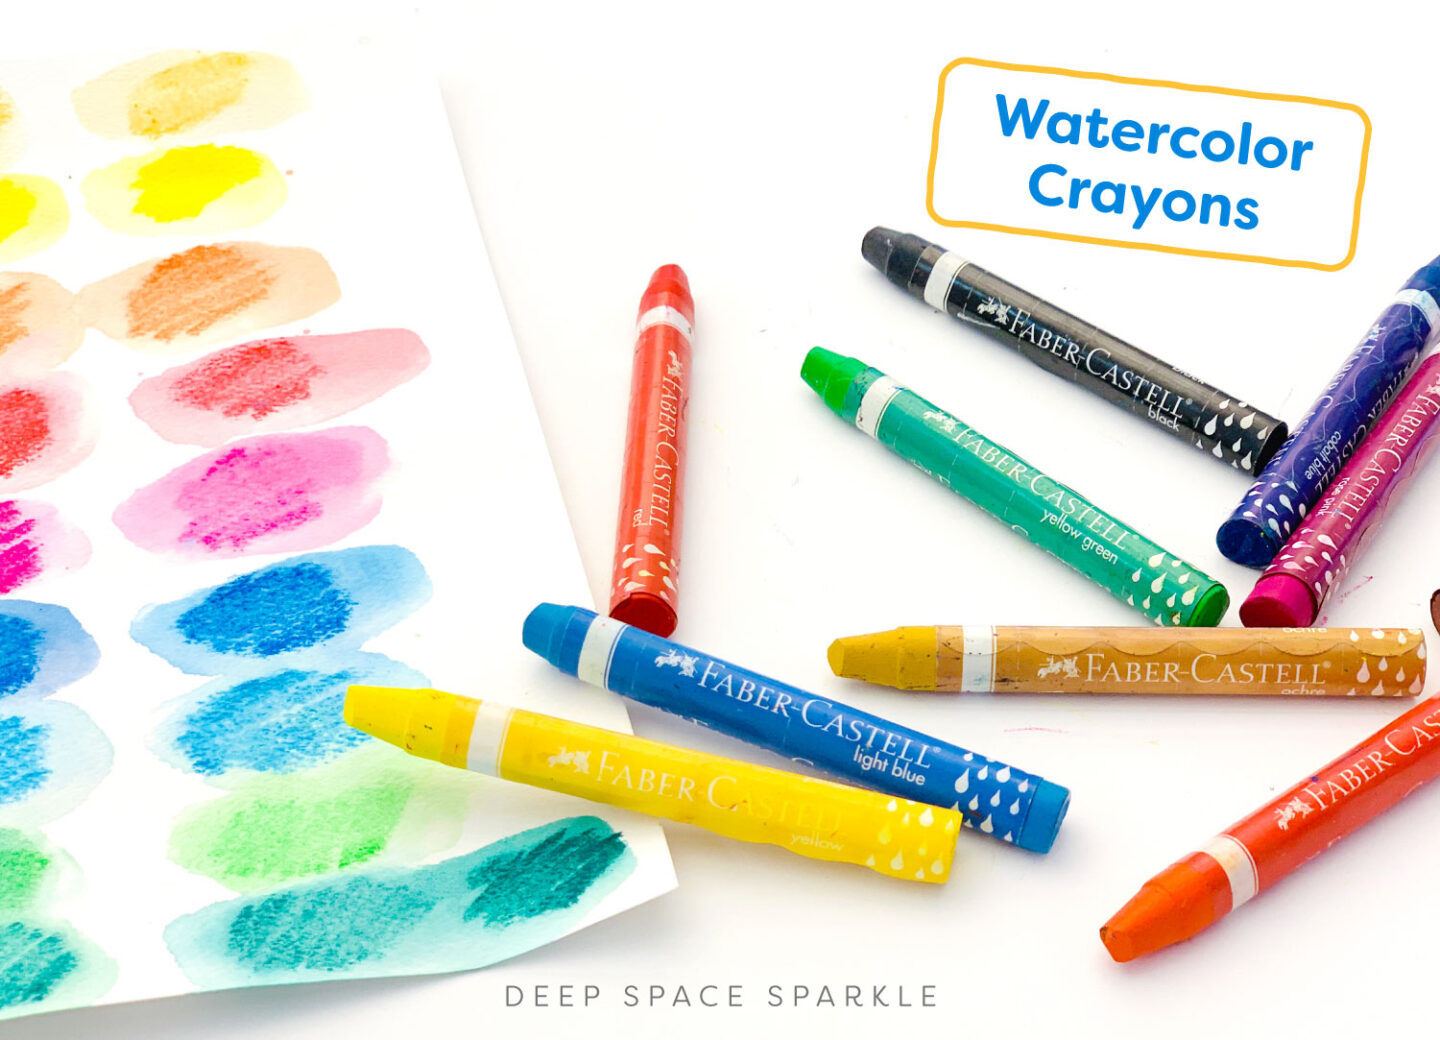 Watercolor Crayons The Top 5 Watercolor, Colored Pencil and Crayon Sets for Kids